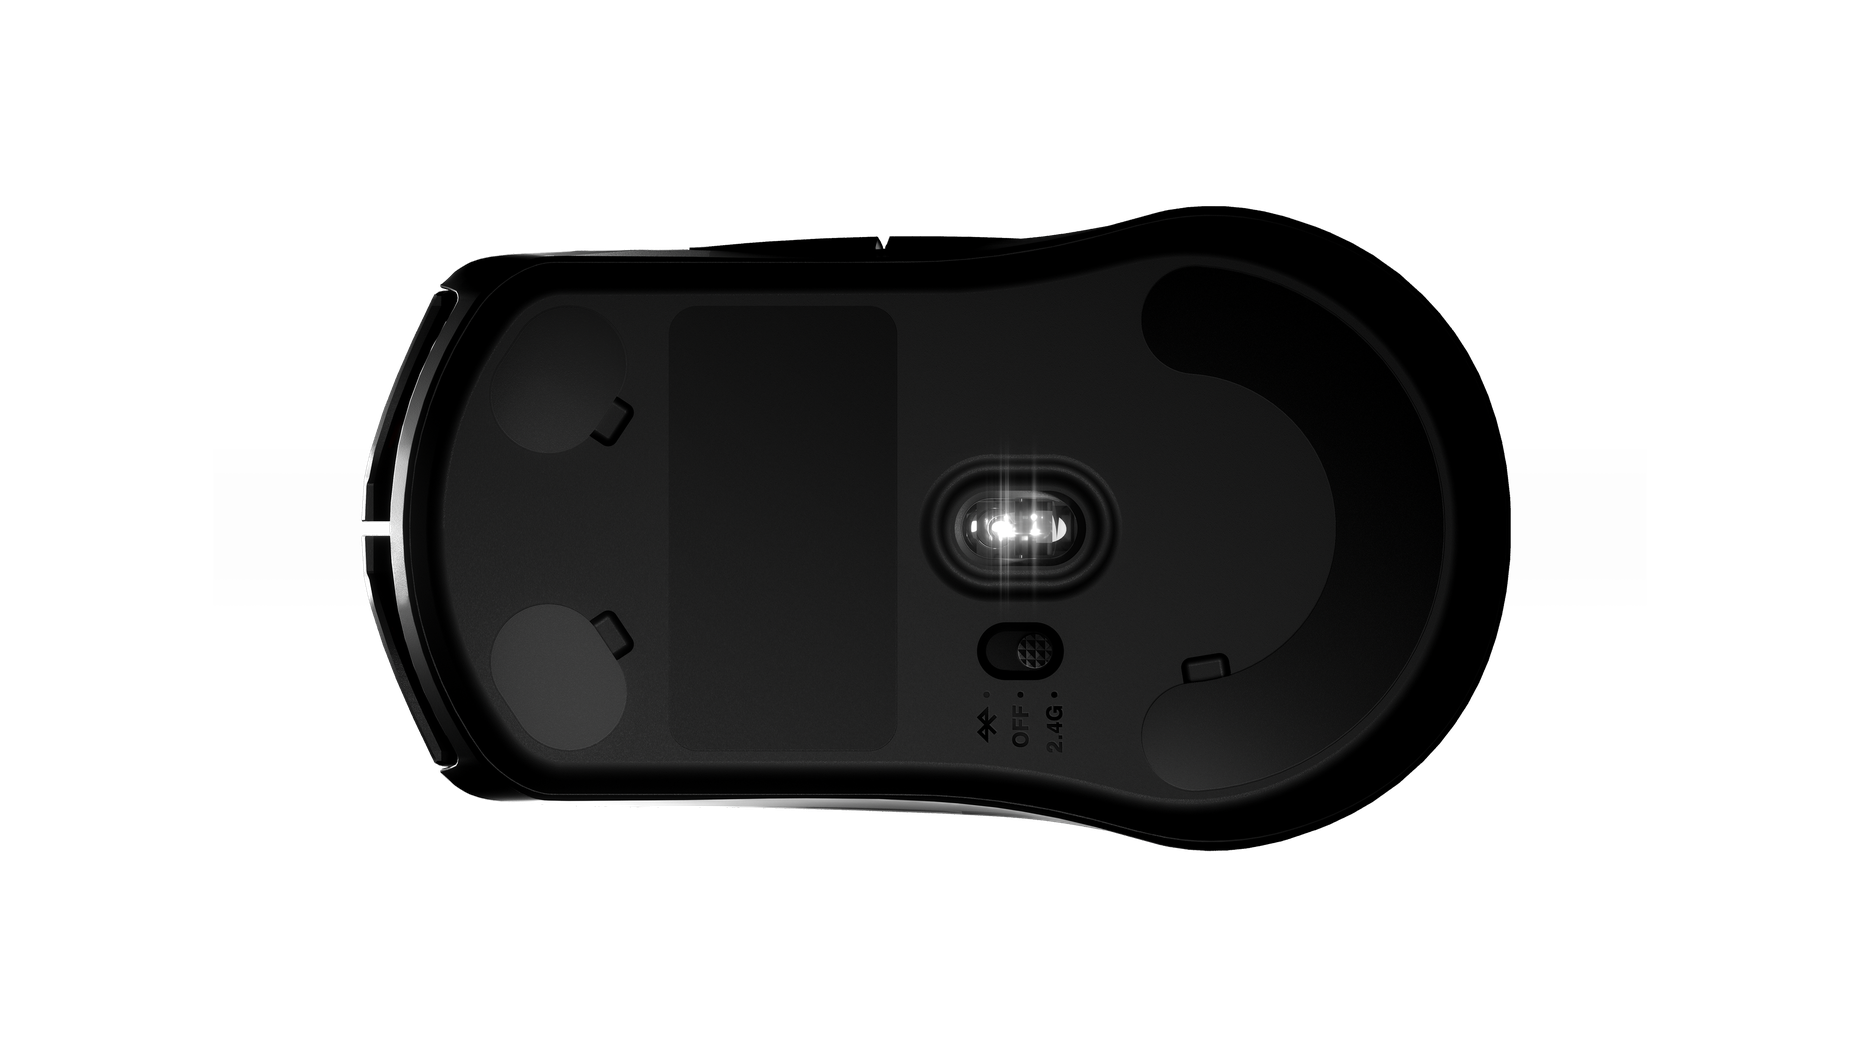 
 Bottom of the mouse to display sensor and foot pad placement
 